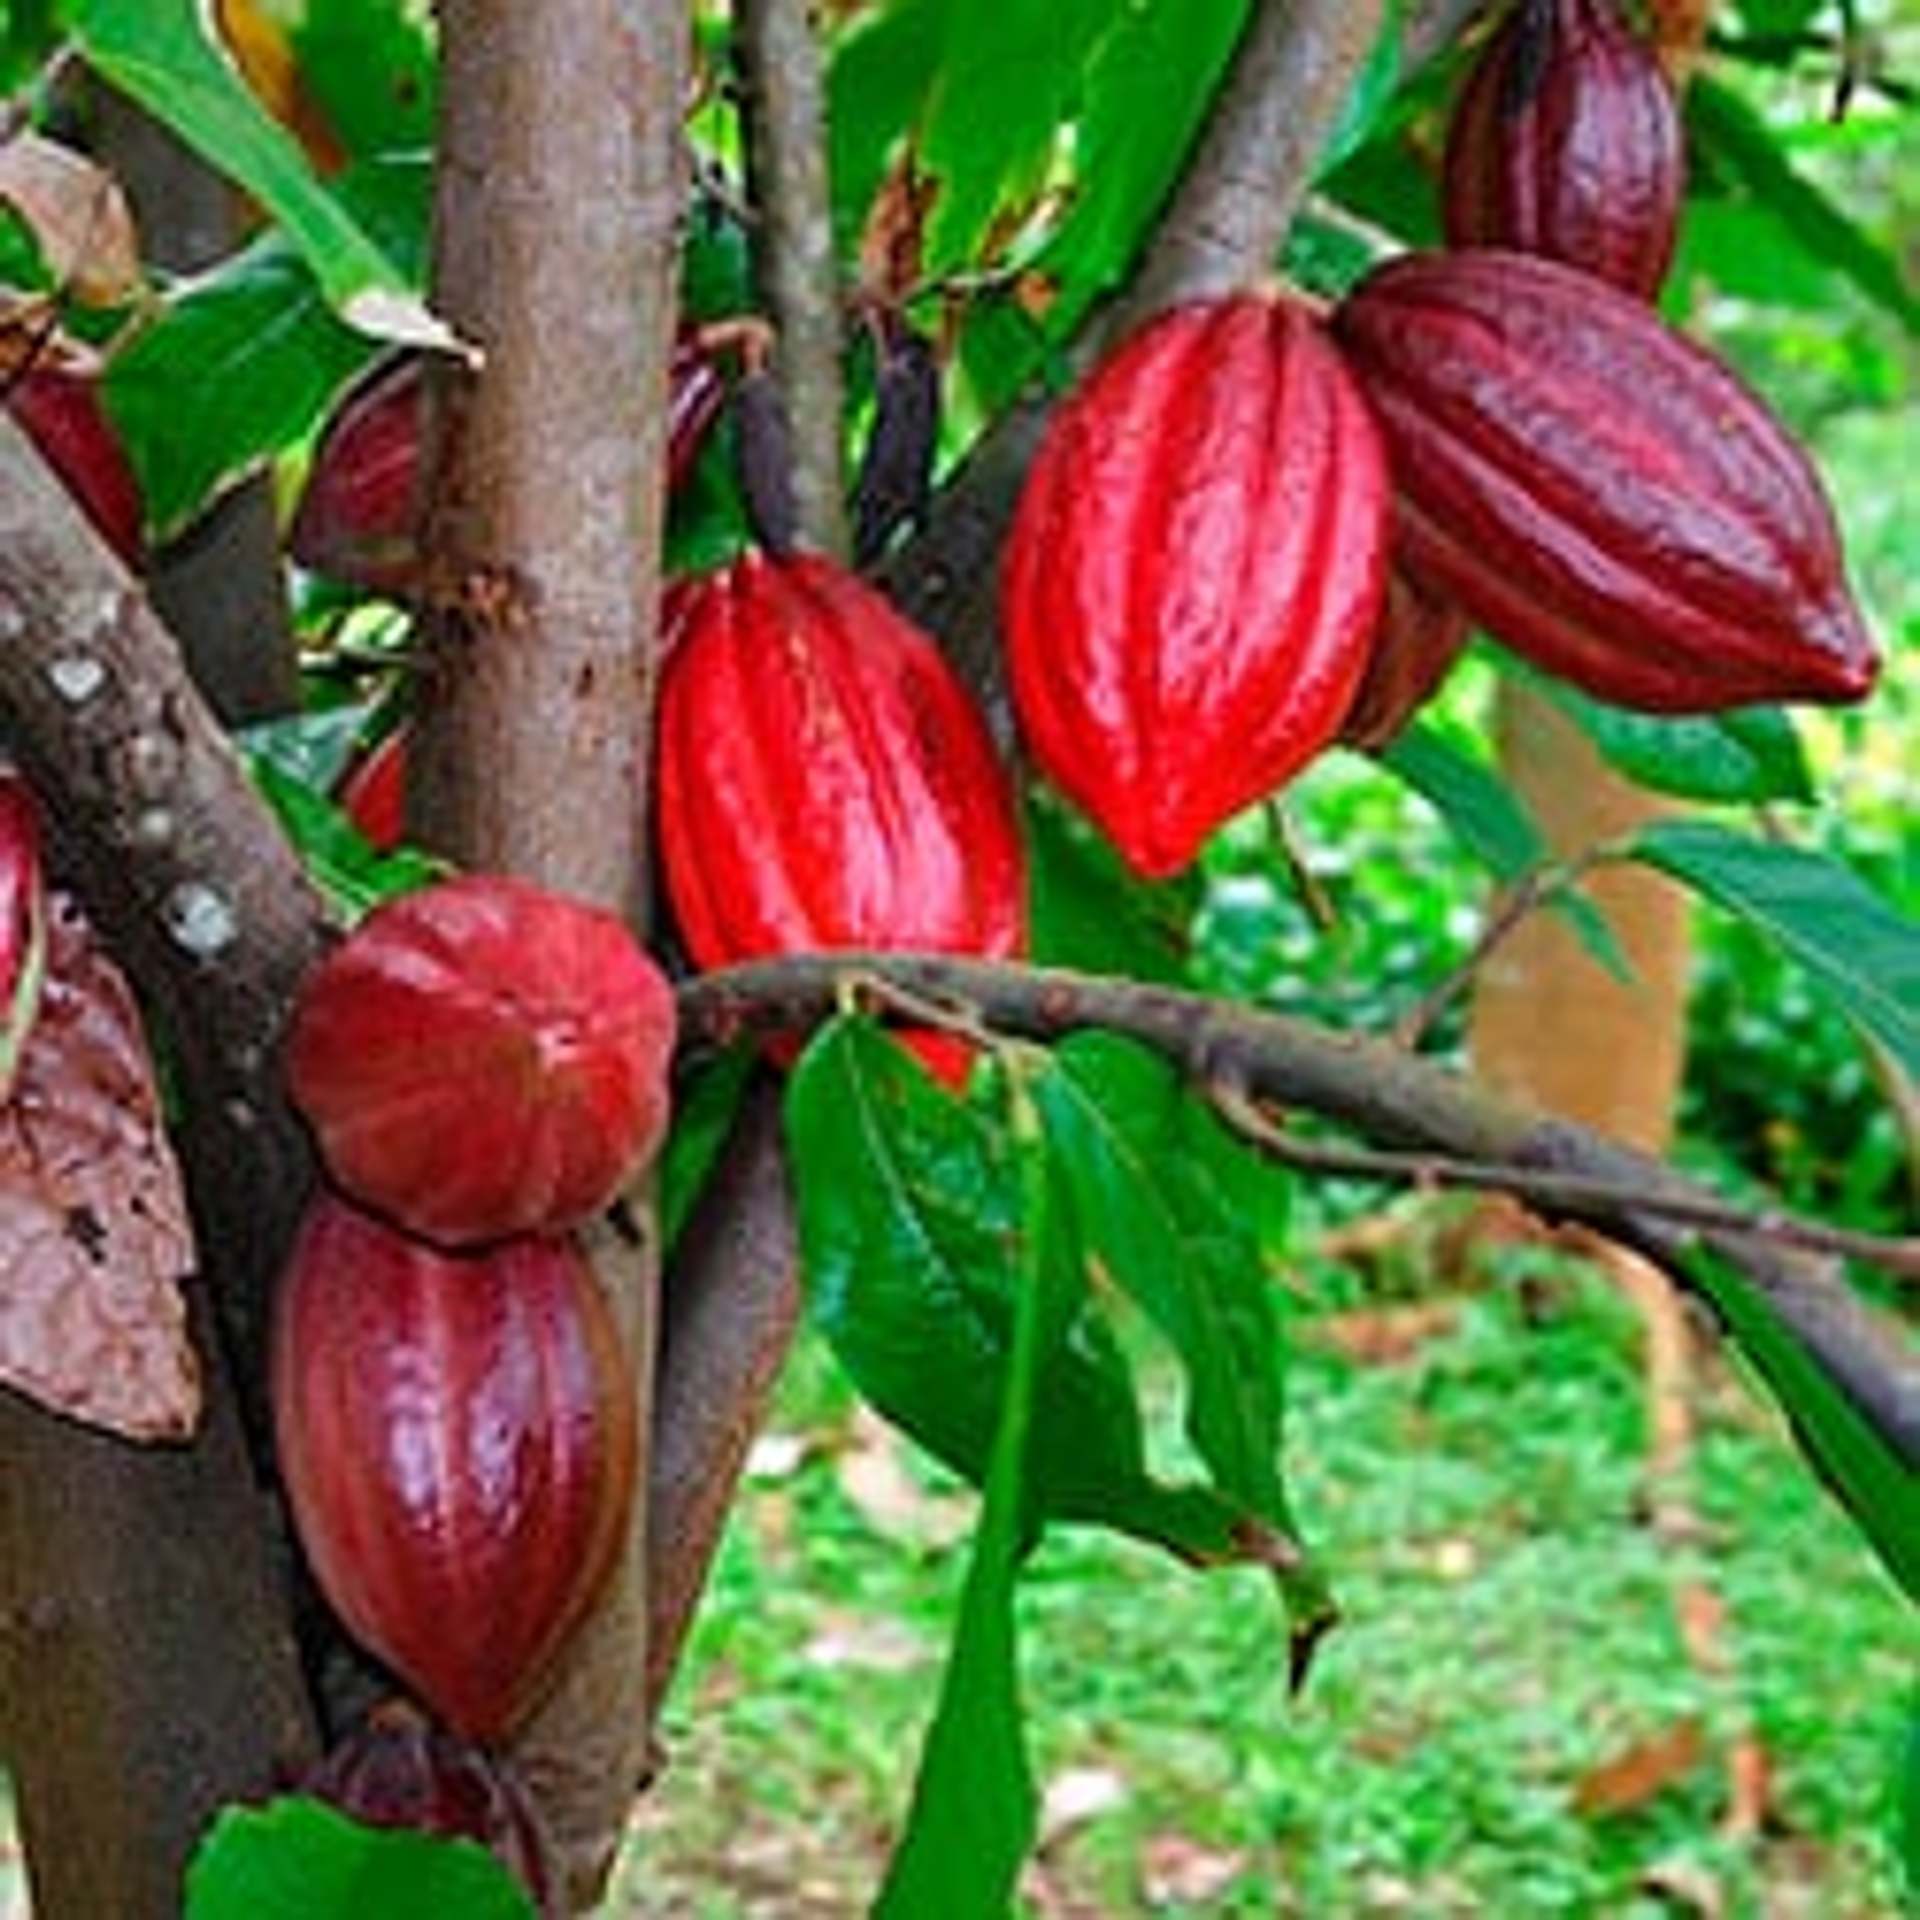 Cacao is the one of those superfoods you will enjoy taking every day.